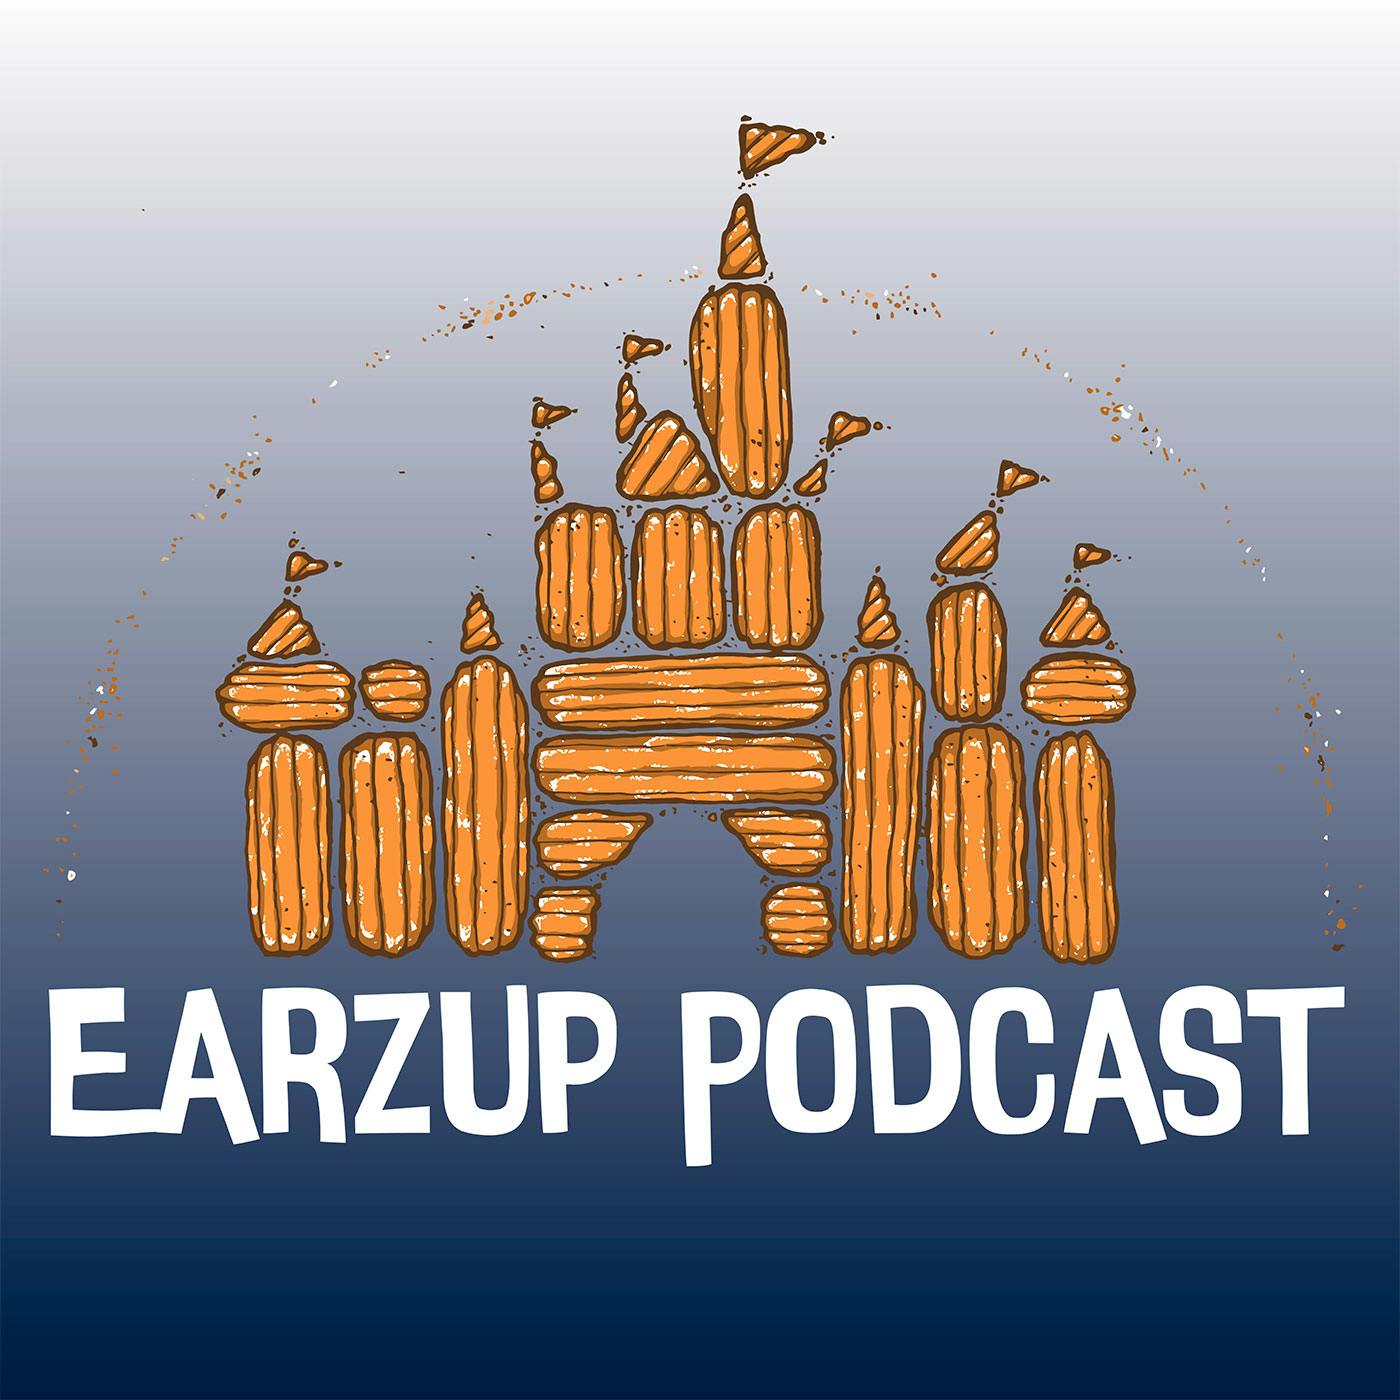 EarzUp! and The Case of the Imagineers | A Supreme Resort Crossover Show